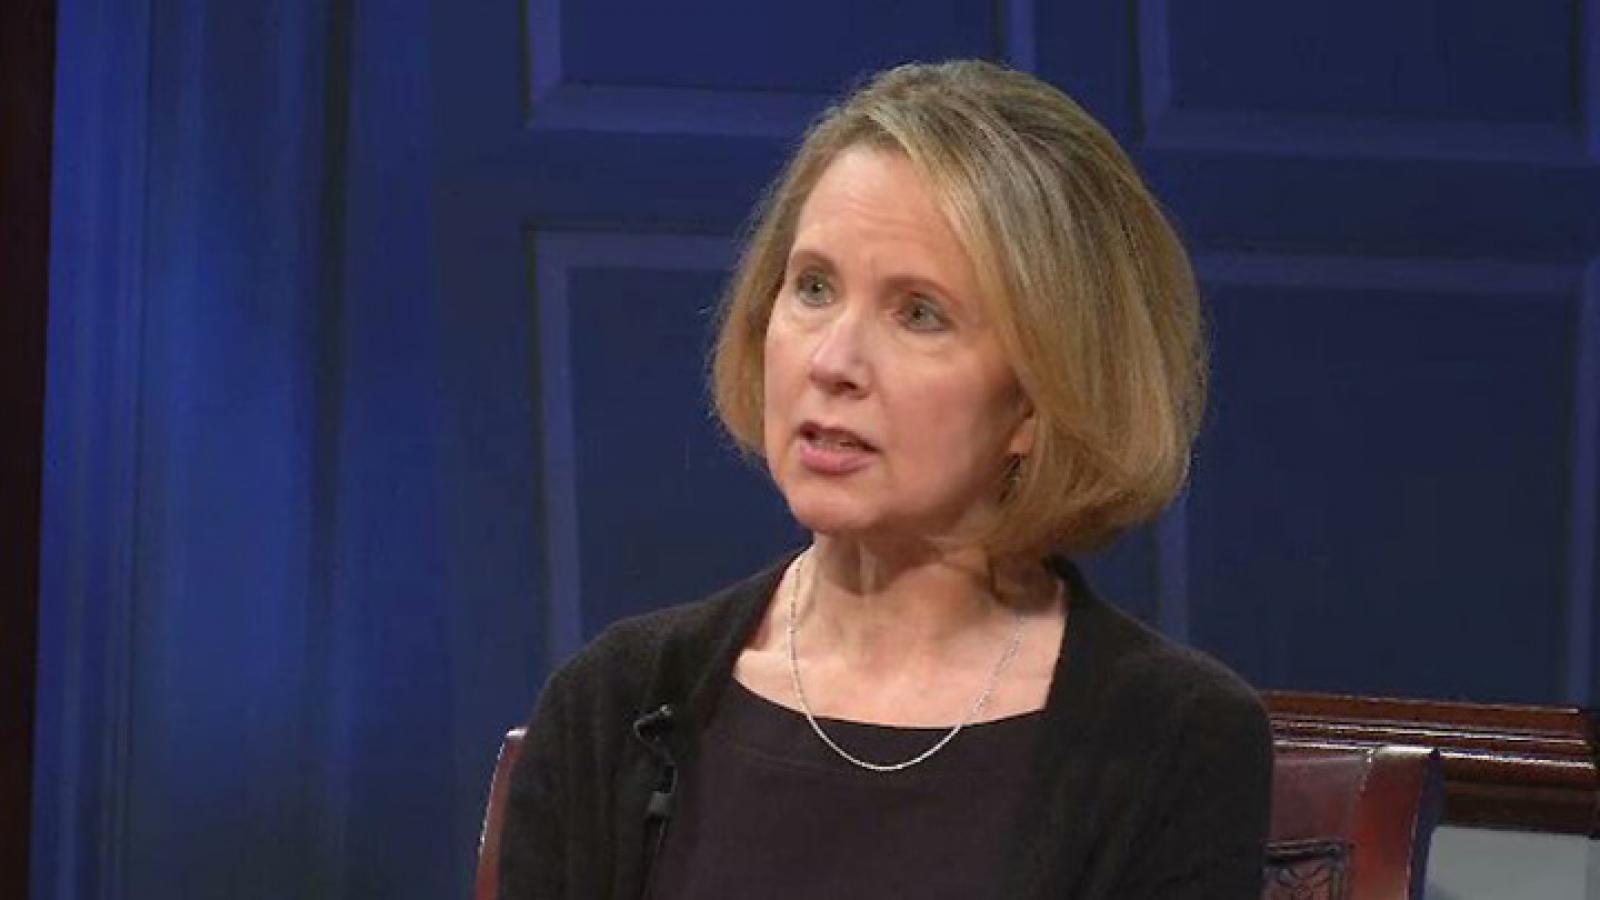 Heather Mac Donald argues that the primary causes of police violence are the high rates of criminal behavior and violence by African Americans.